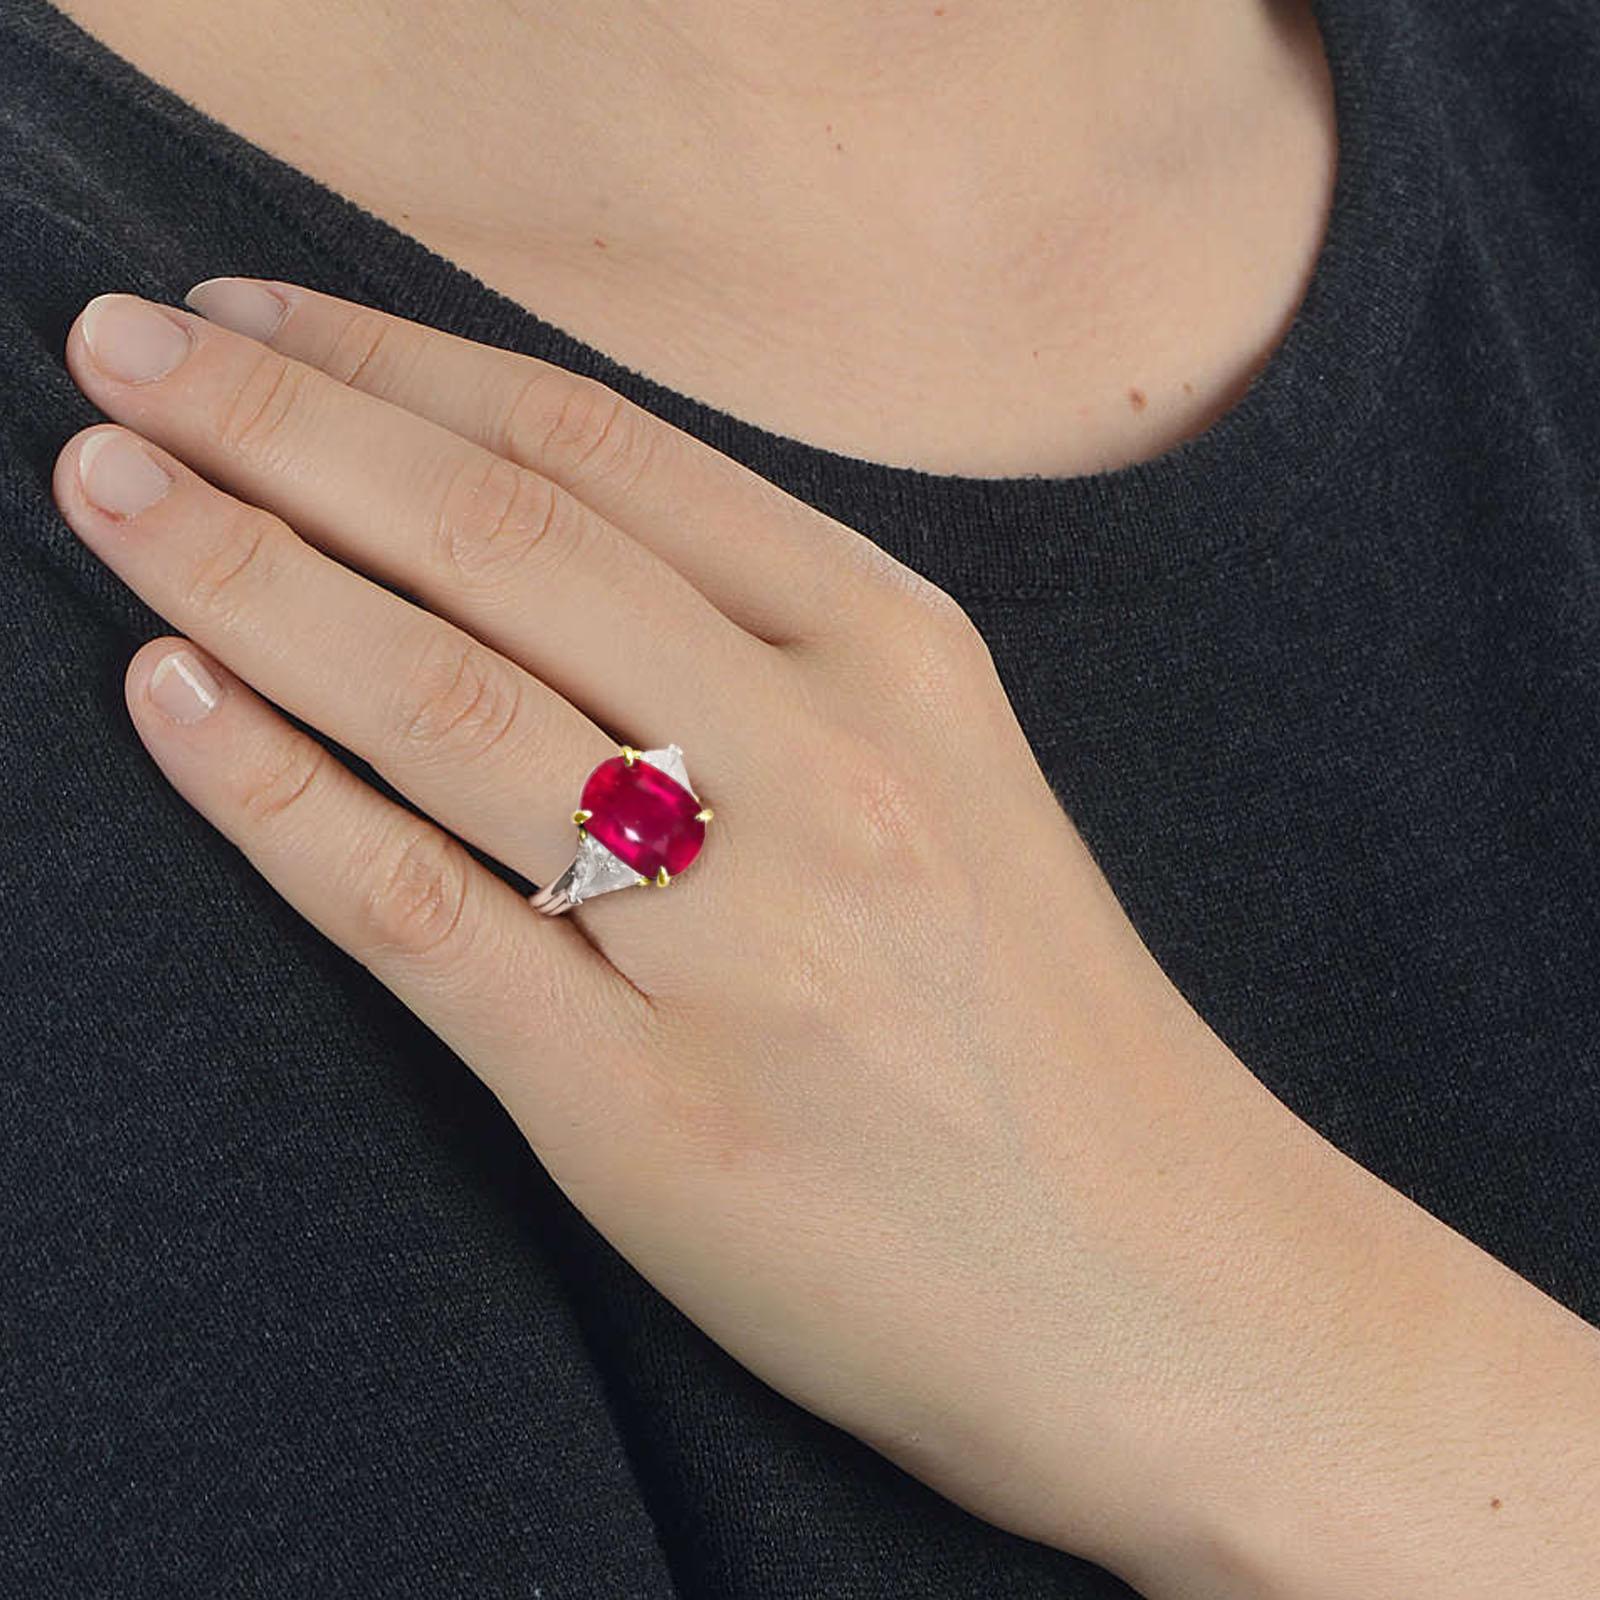 A STUNNING red ruby diamond ring!

GRS Certified 6.72 Carat Natural Untreated Unheated Red Ruby Diamond Ring

.60 carats of white side diamonds.

Custom platinum and 18k yellow gold mounting.

Size 6, this ring can easily be resized.